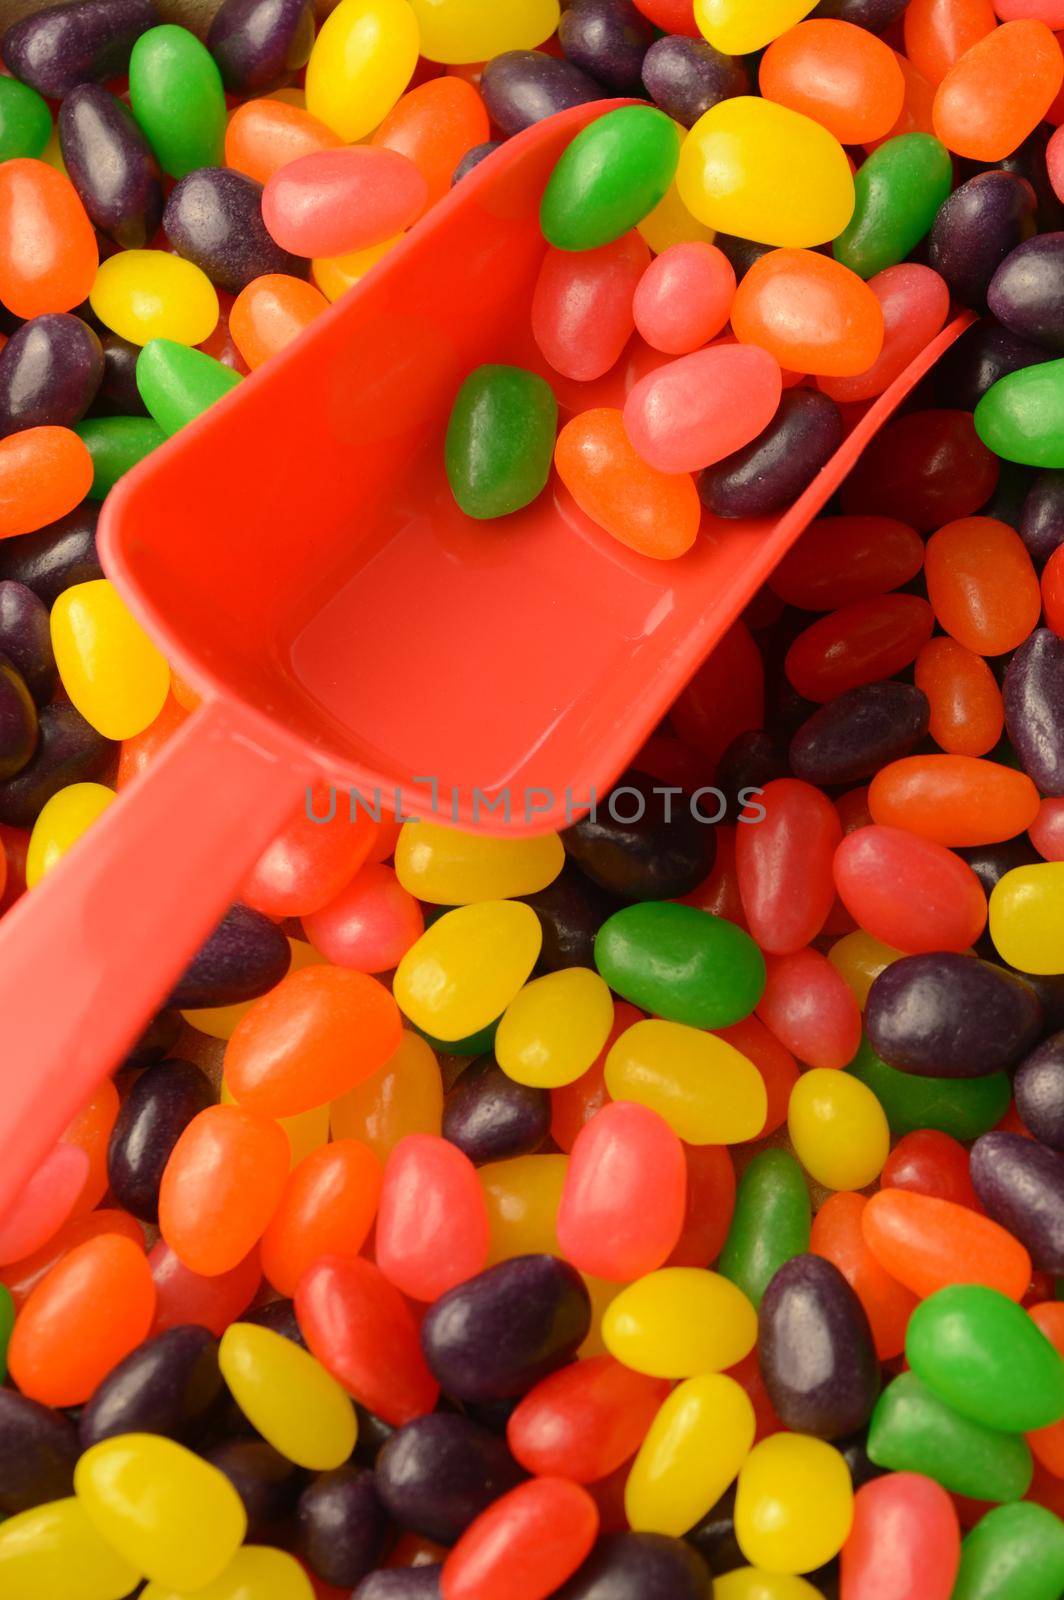 A closeup view of a red scoop in an abundant supply of jelly bean candy.